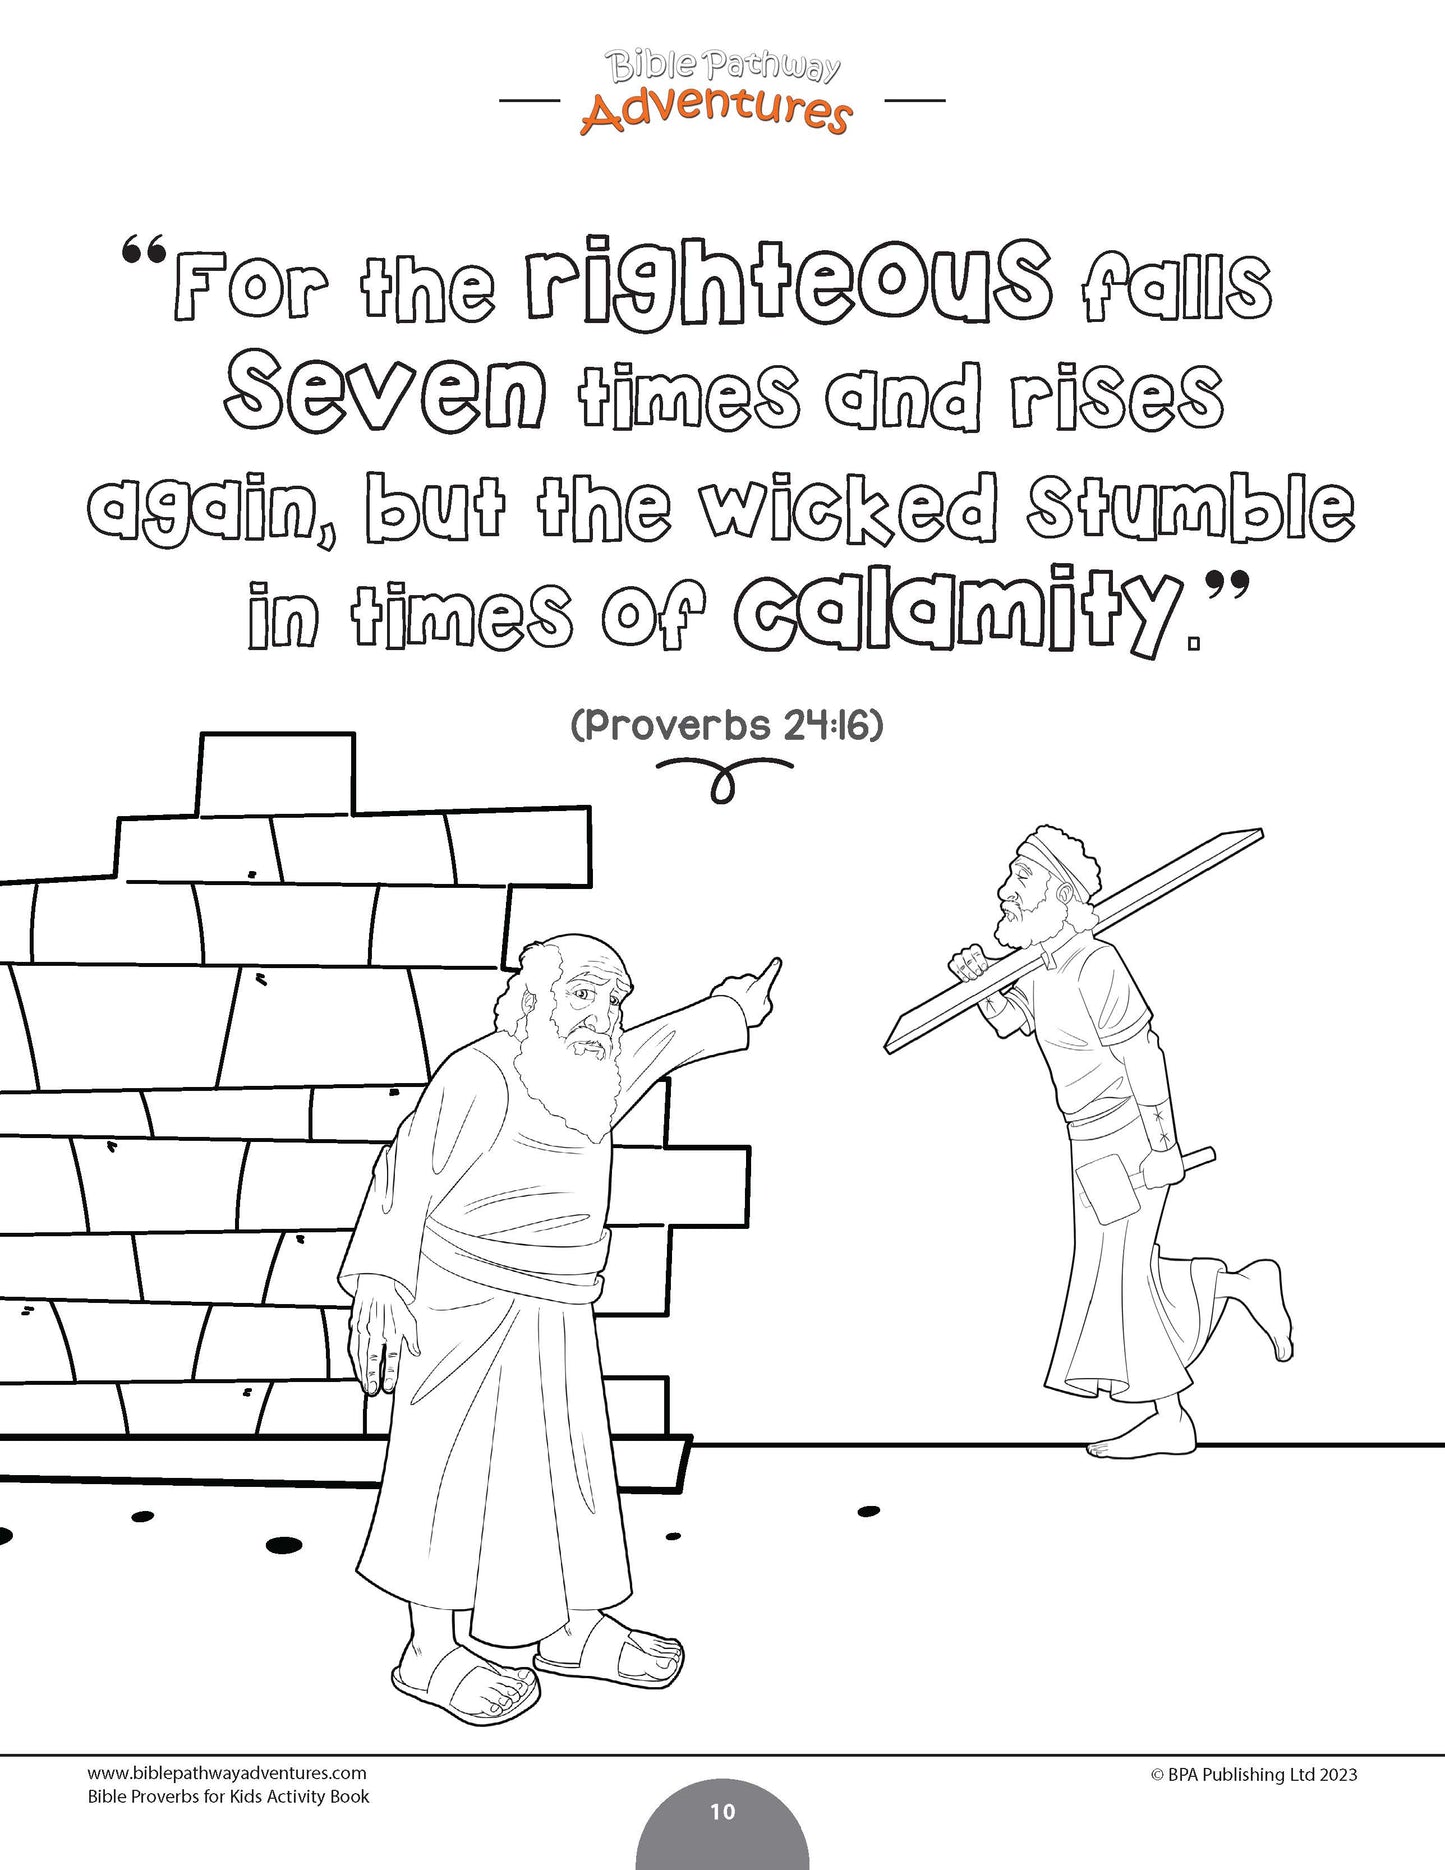 Perseverance: Bible Activity Book for Kids (PDF)